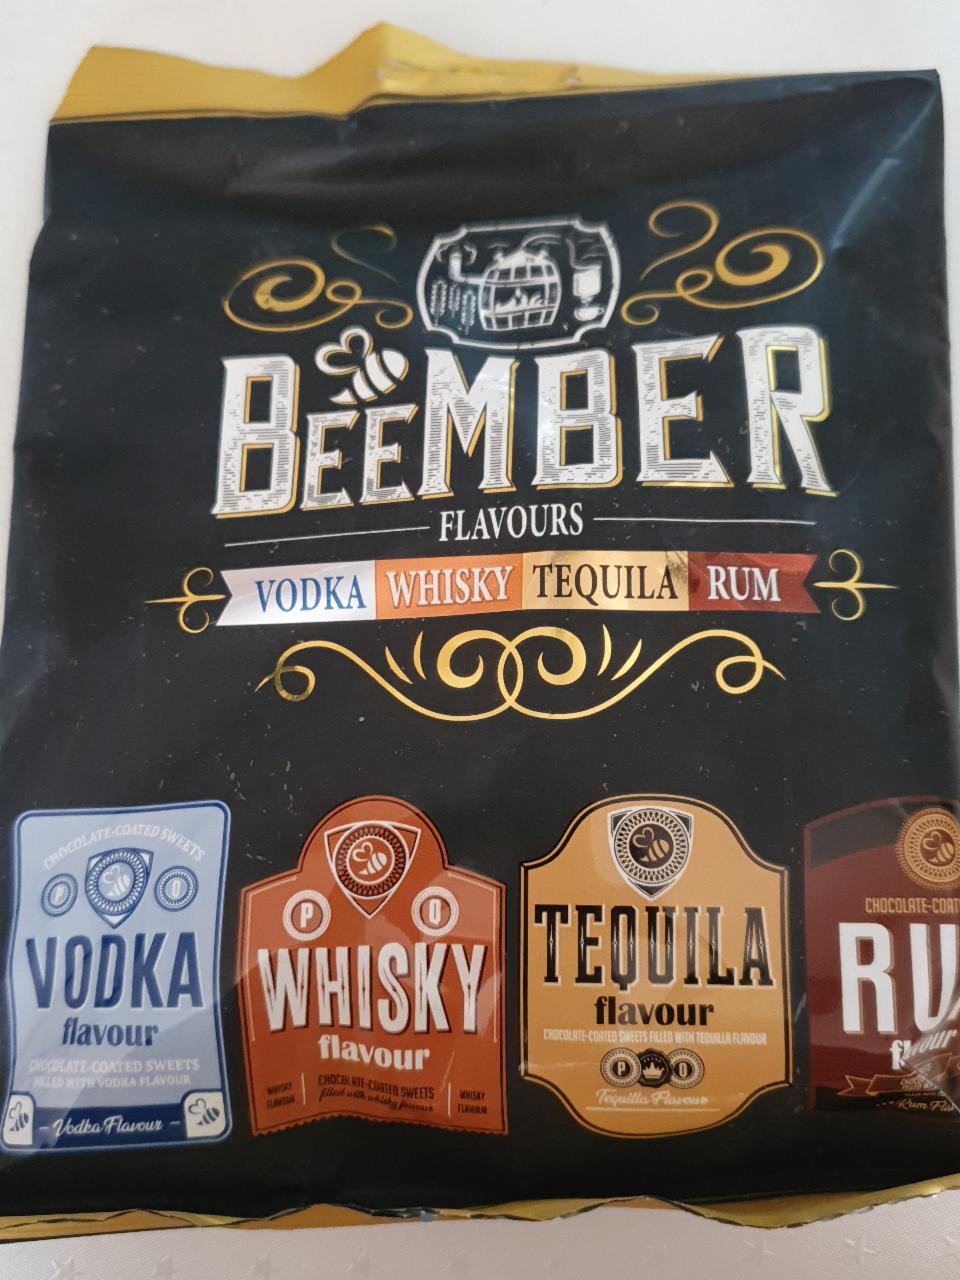 Fotografie - BeeMBER flavours Vodka Whisky Tequila Rum